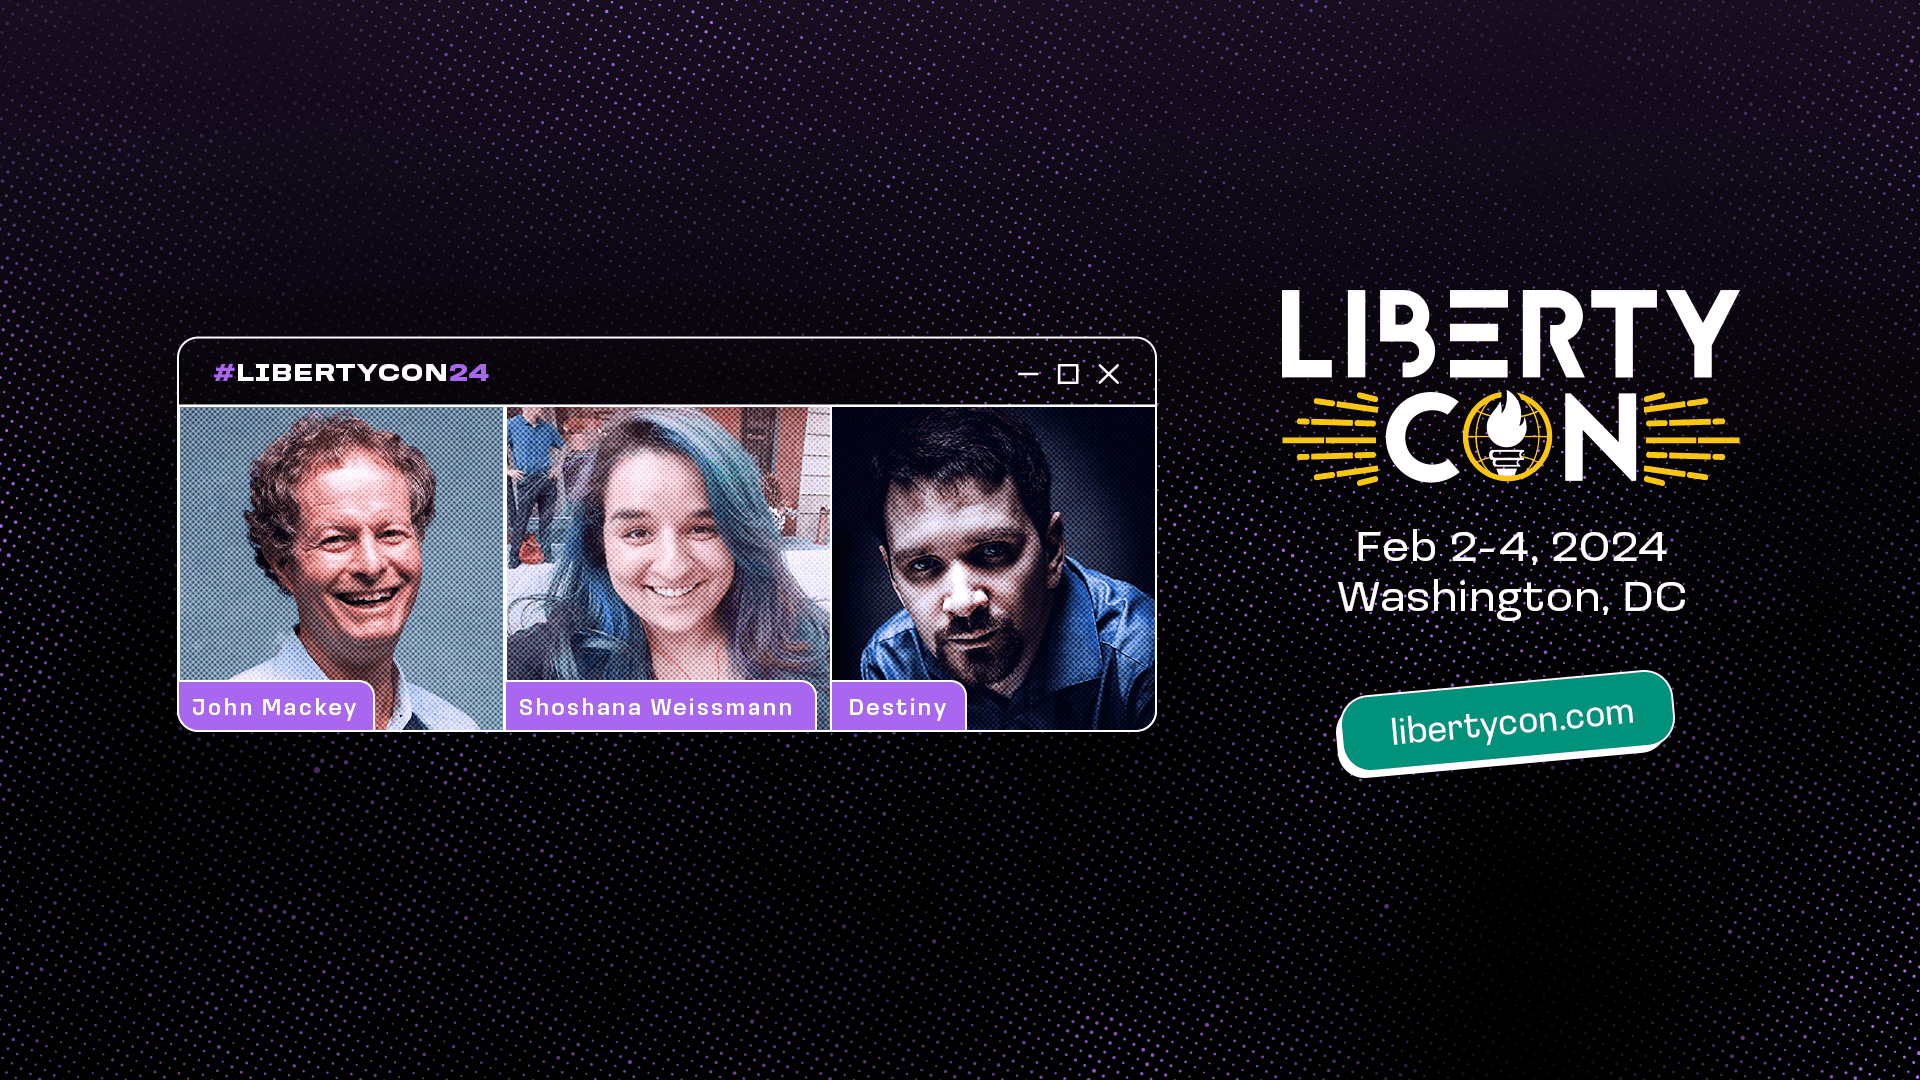 Students For Liberty, the largest international pro-liberty student organization, has several new speakers to announce for their flagship event, LibertyCon International 2024.